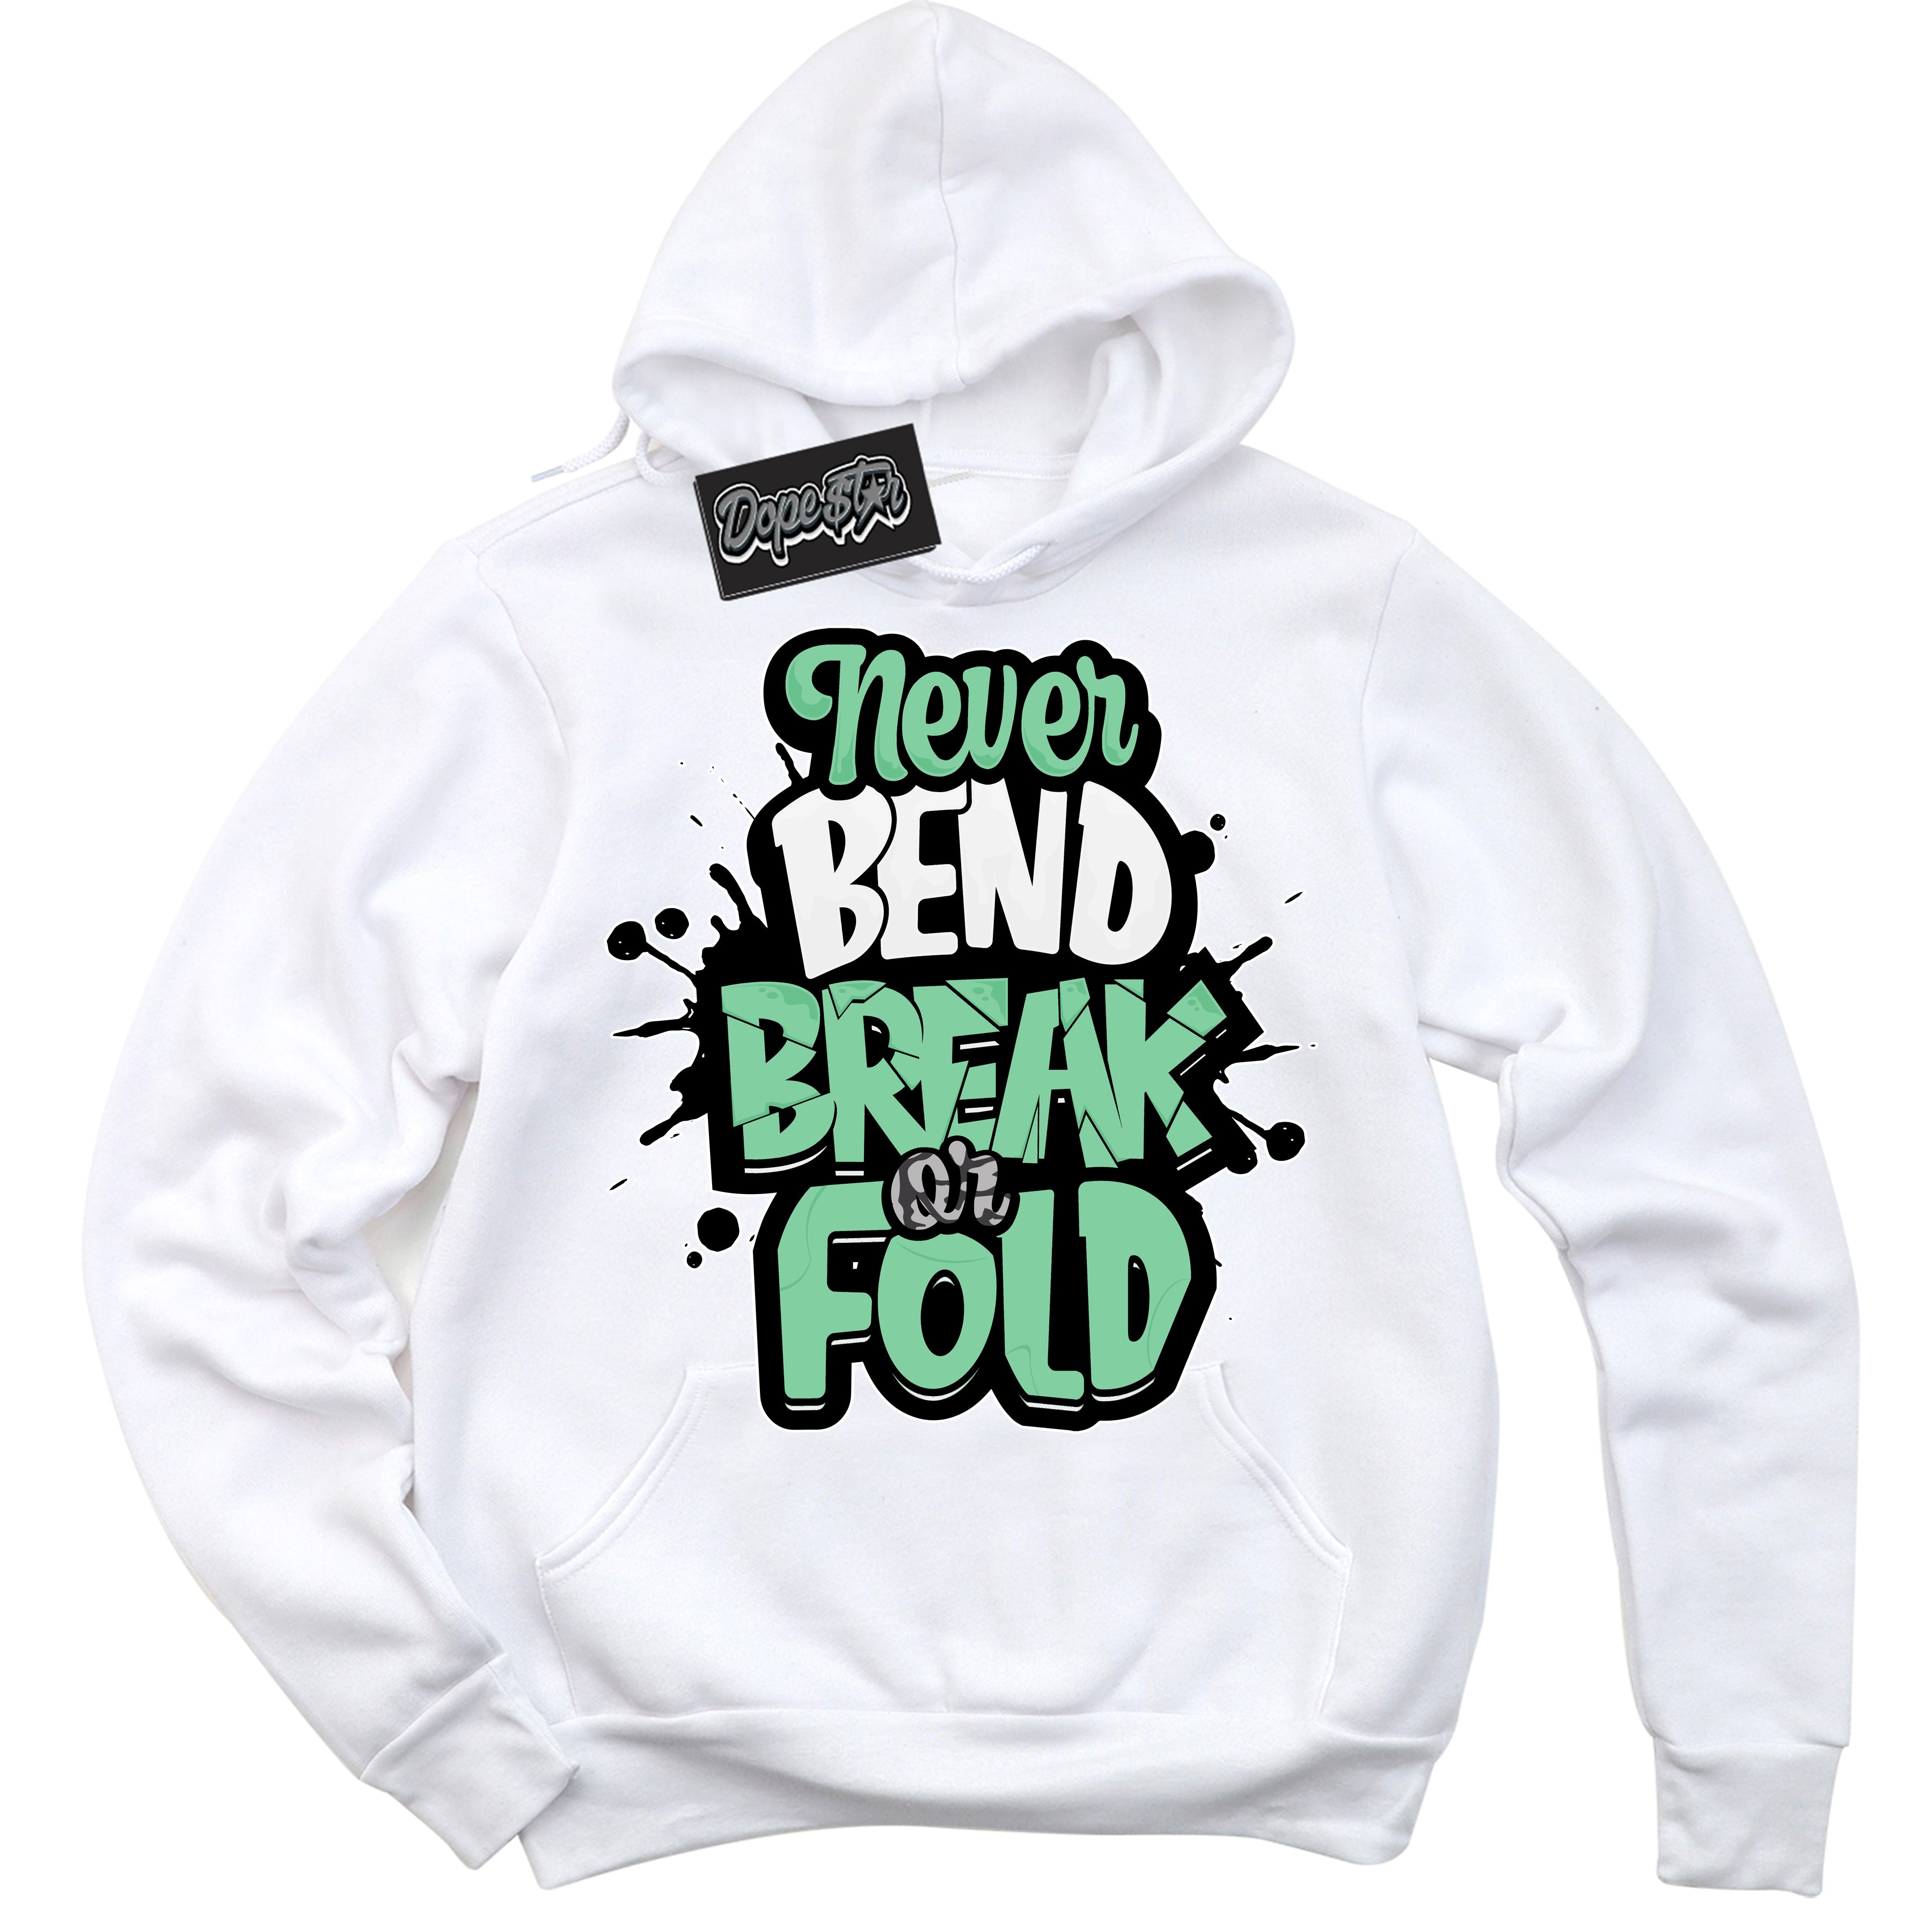 Cool White Graphic DopeStar Hoodie with “ Never Bend Break or Fold “ print, that perfectly matches Green Glow 3s sneakers